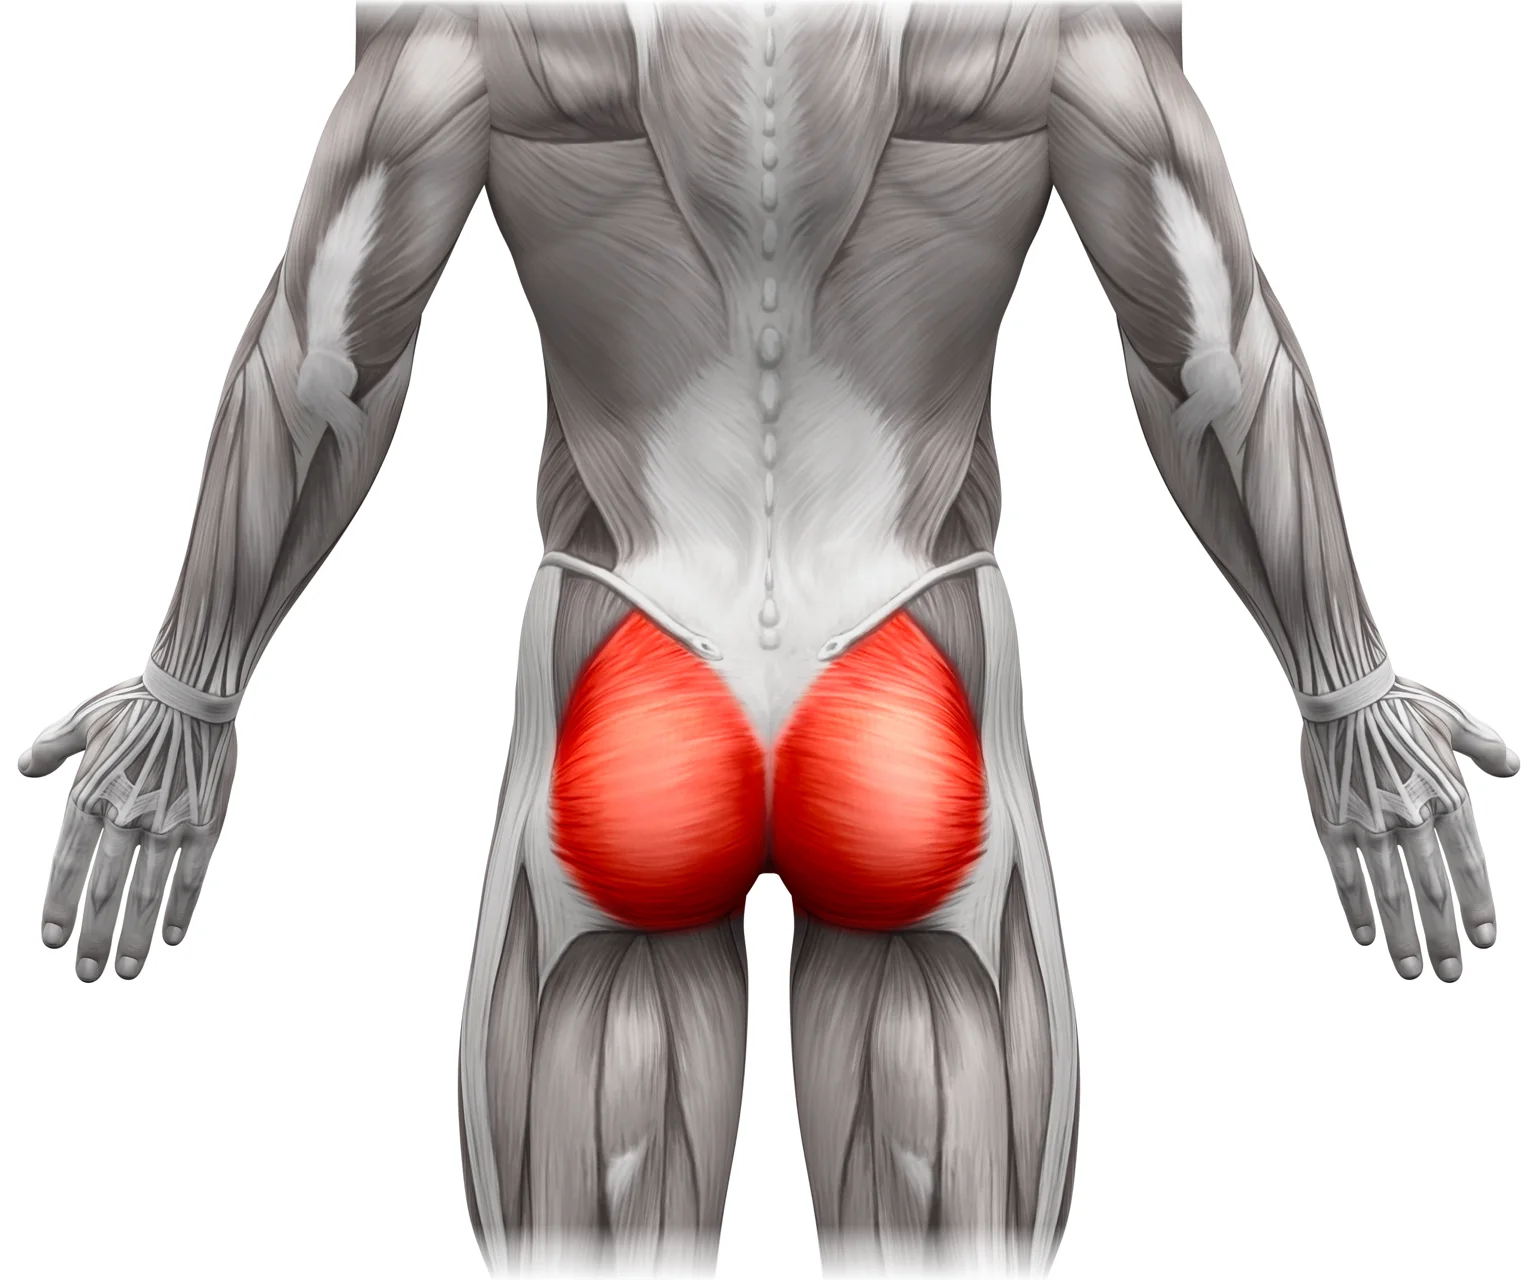 diagram - View from the back of a person's body, showing the glutes position in the buttocks.